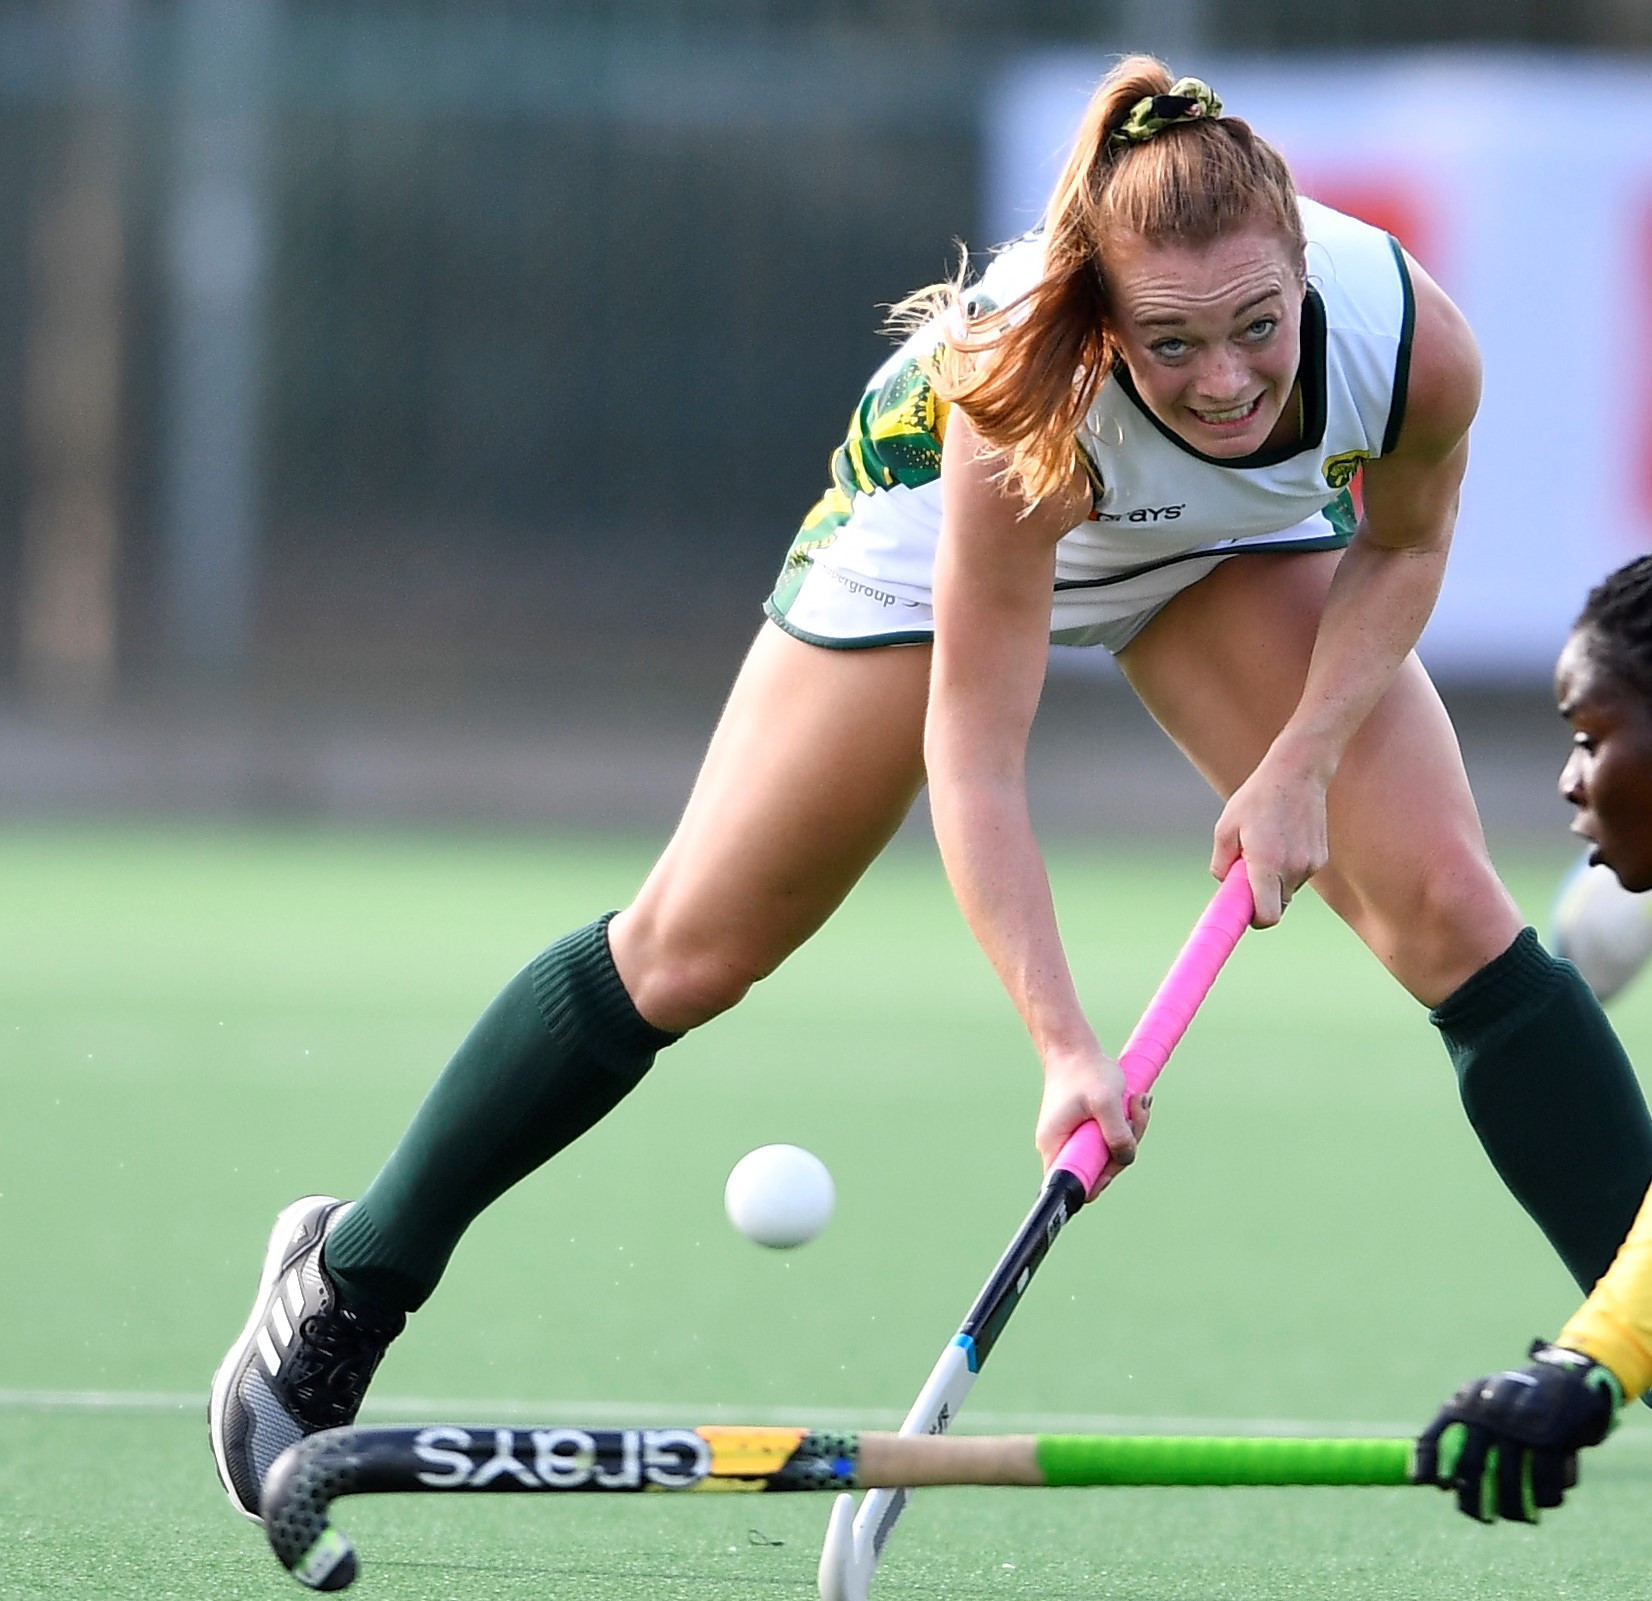 South Africa make winning start at hockey's Africa Cup of Nations, Kenyan arrival delayed